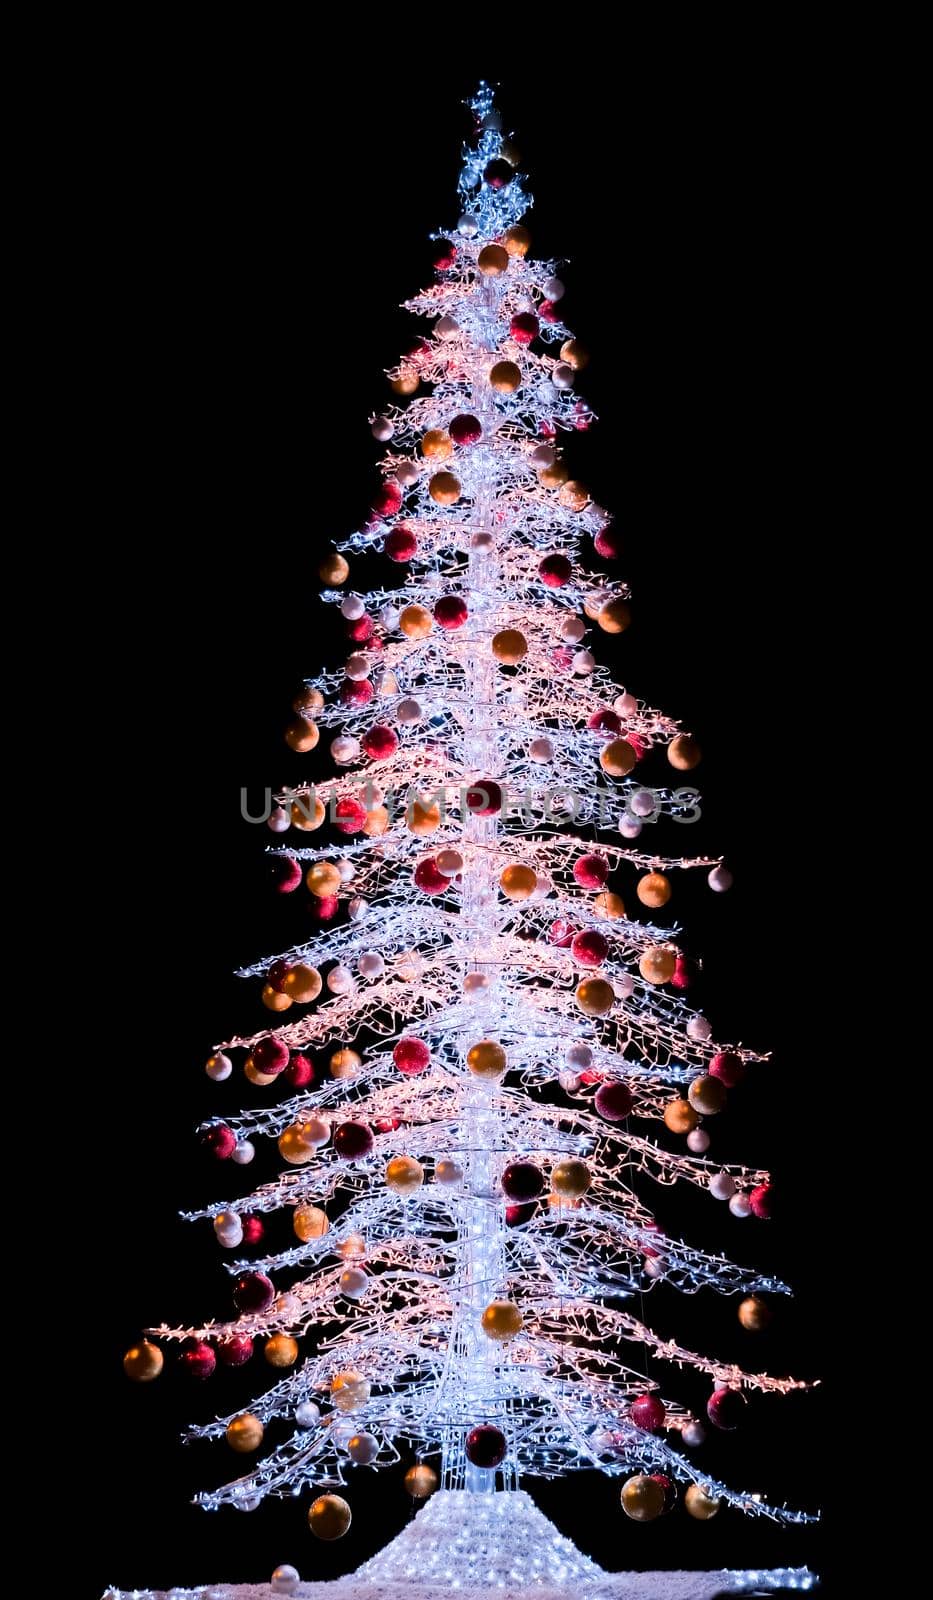 large white fir tree decorated with Christmas lights at night